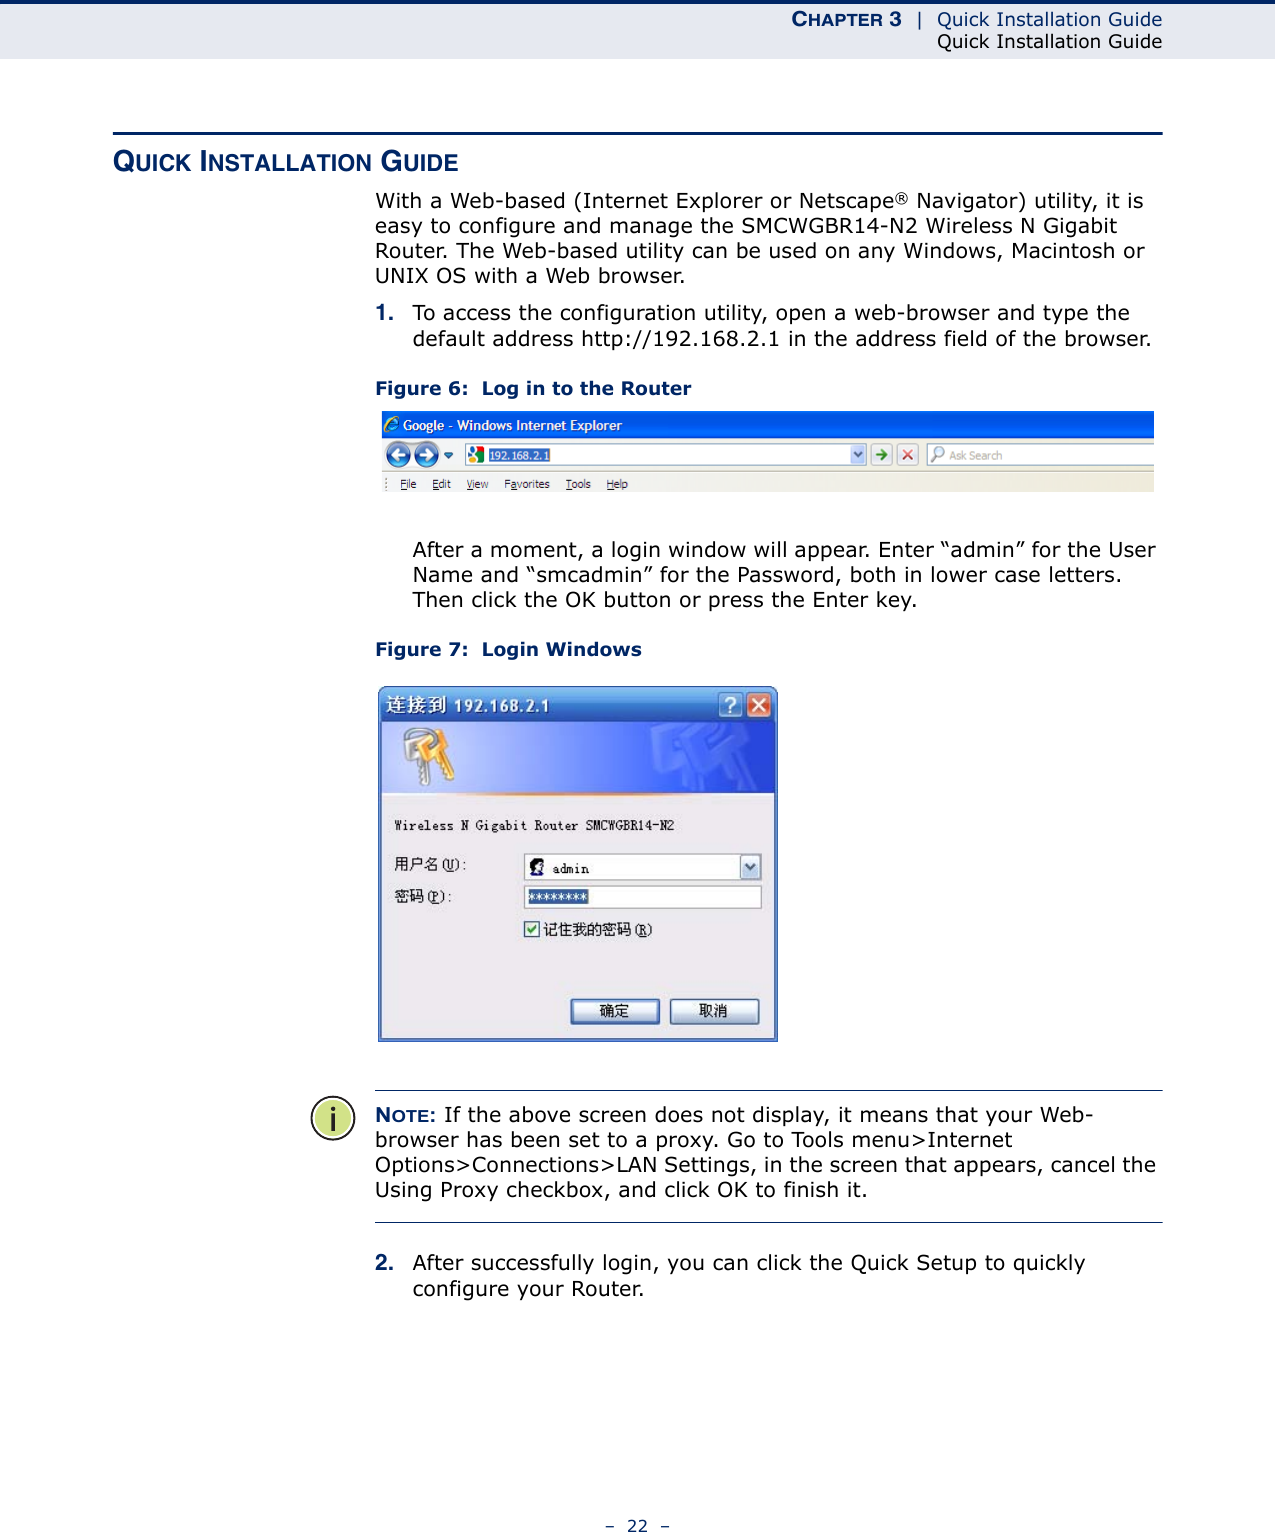 CHAPTER 3  |  Quick Installation GuideQuick Installation Guide–  22  –QUICK INSTALLATION GUIDEWith a Web-based (Internet Explorer or Netscape® Navigator) utility, it is easy to configure and manage the SMCWGBR14-N2 Wireless N Gigabit Router. The Web-based utility can be used on any Windows, Macintosh or UNIX OS with a Web browser.1. To access the configuration utility, open a web-browser and type the default address http://192.168.2.1 in the address field of the browser.Figure 6:  Log in to the RouterAfter a moment, a login window will appear. Enter “admin” for the User Name and “smcadmin” for the Password, both in lower case letters. Then click the OK button or press the Enter key.Figure 7:  Login WindowsNOTE: If the above screen does not display, it means that your Web-browser has been set to a proxy. Go to Tools menu&gt;Internet Options&gt;Connections&gt;LAN Settings, in the screen that appears, cancel the Using Proxy checkbox, and click OK to finish it.2. After successfully login, you can click the Quick Setup to quickly configure your Router. 